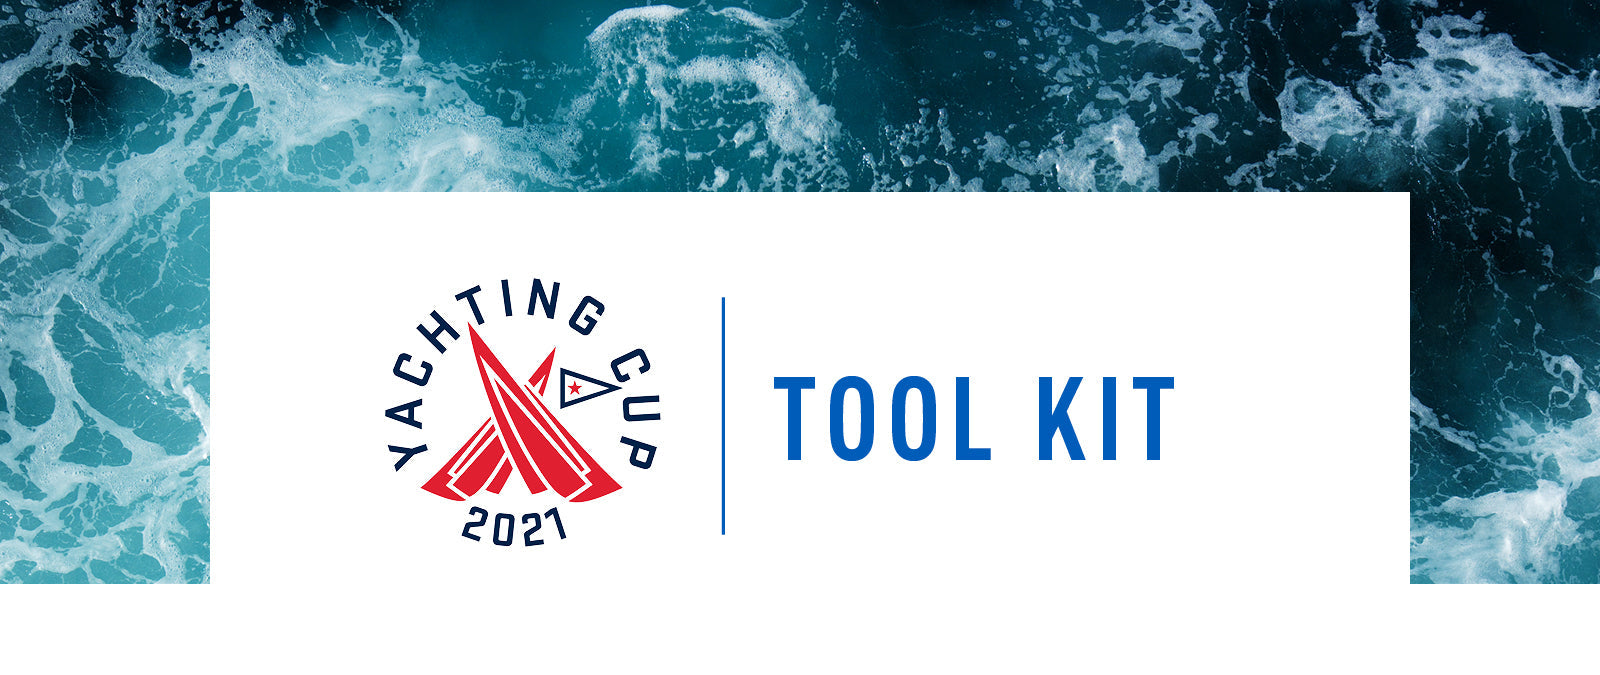 YACHTING CUP TOOL KIT